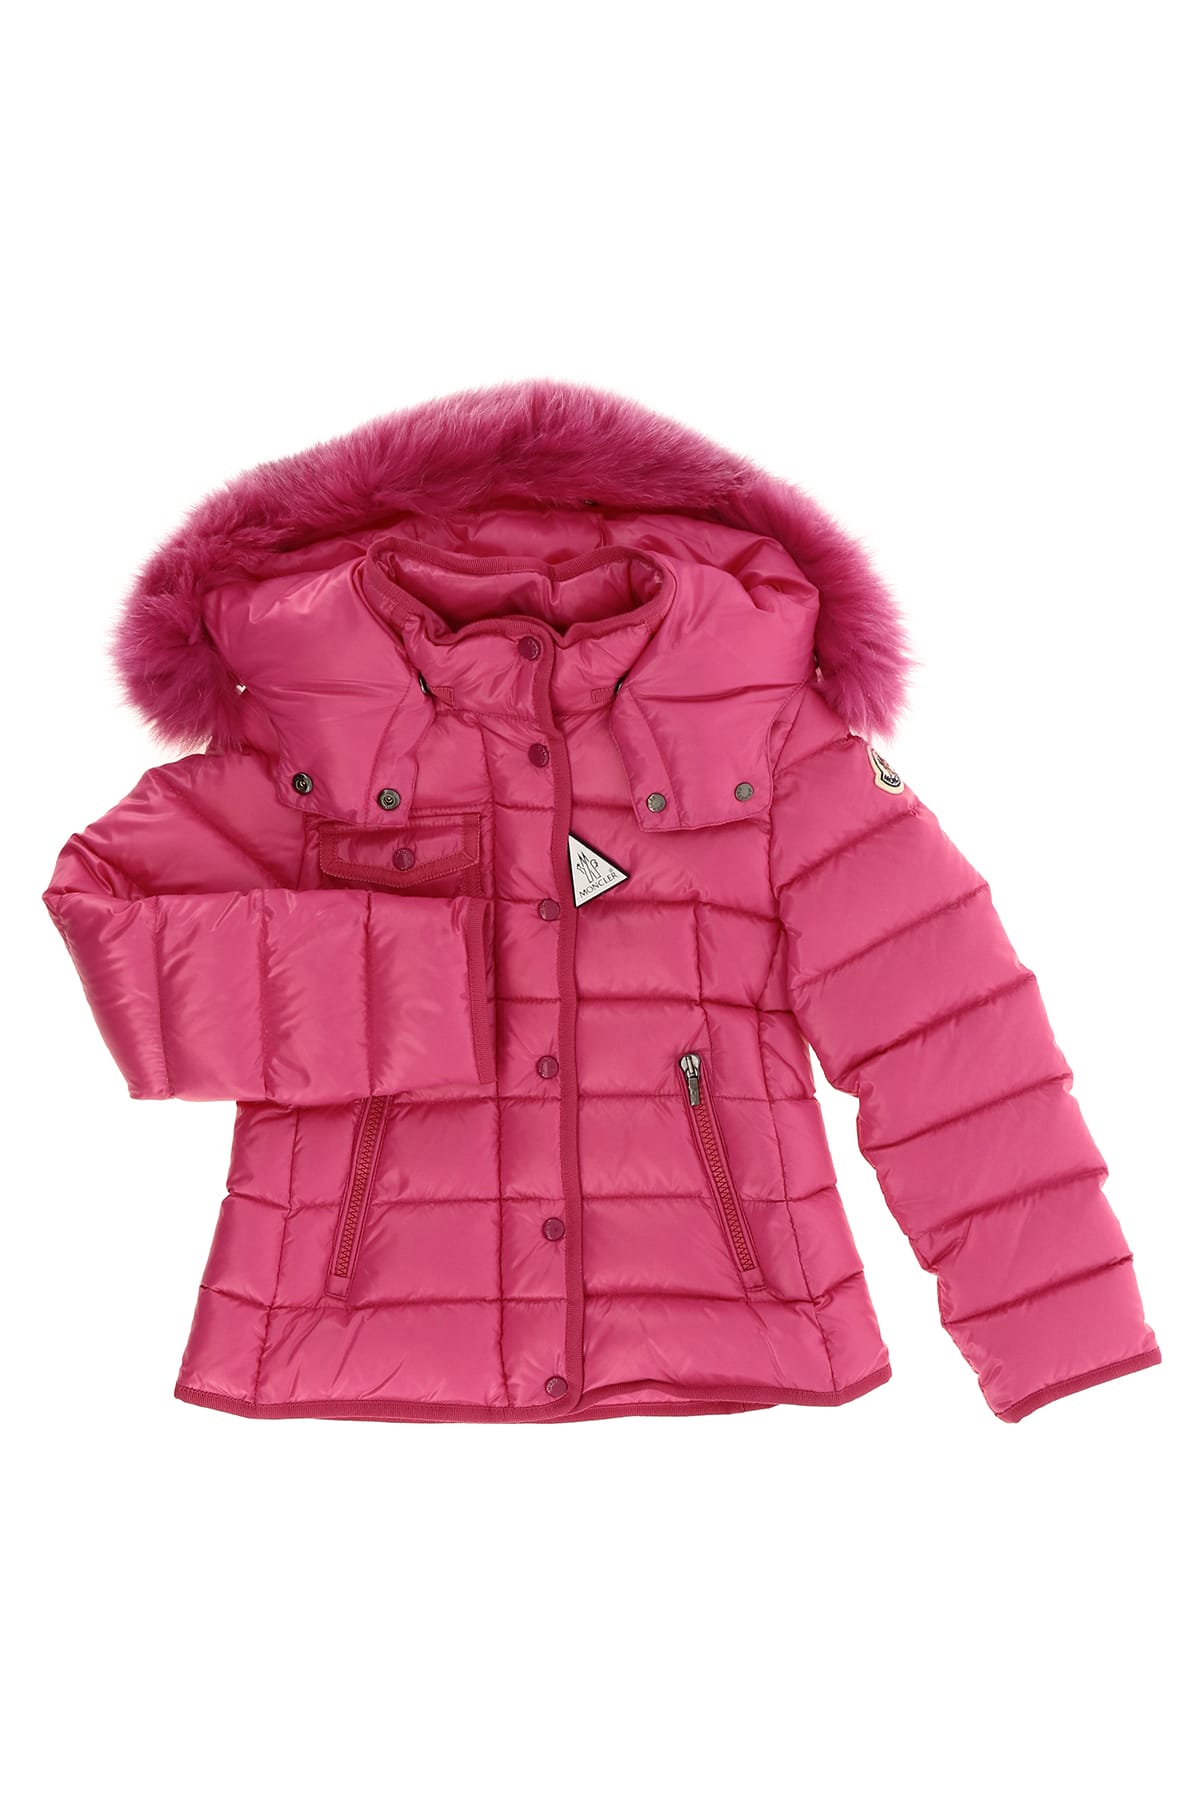 Moncler Kids' New Armoise Down Jacket With Detachable Hood And Fur Trimming In Fucsia